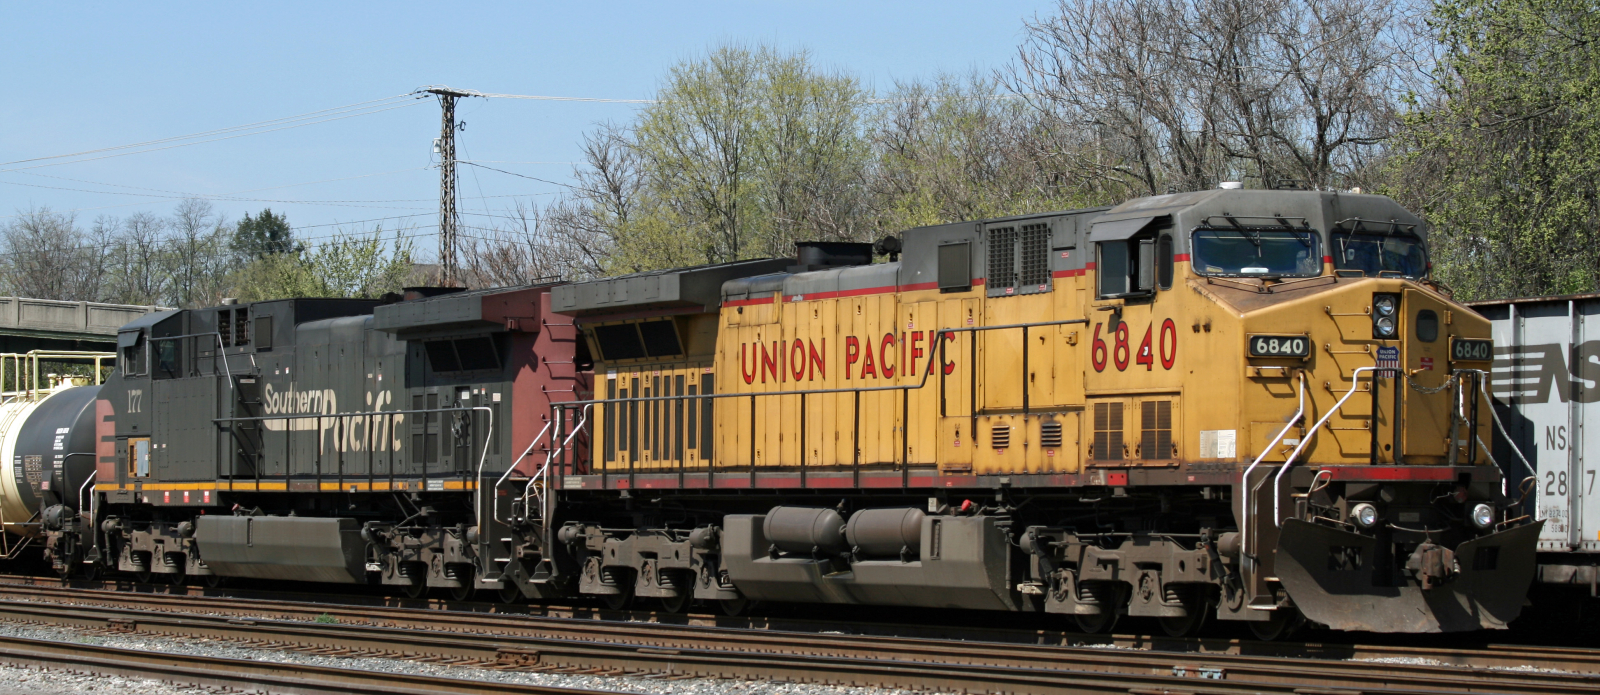 One AC4400CW each of Union Pacific and Southern Pacific in April 2010 in Roanoke, Virginia